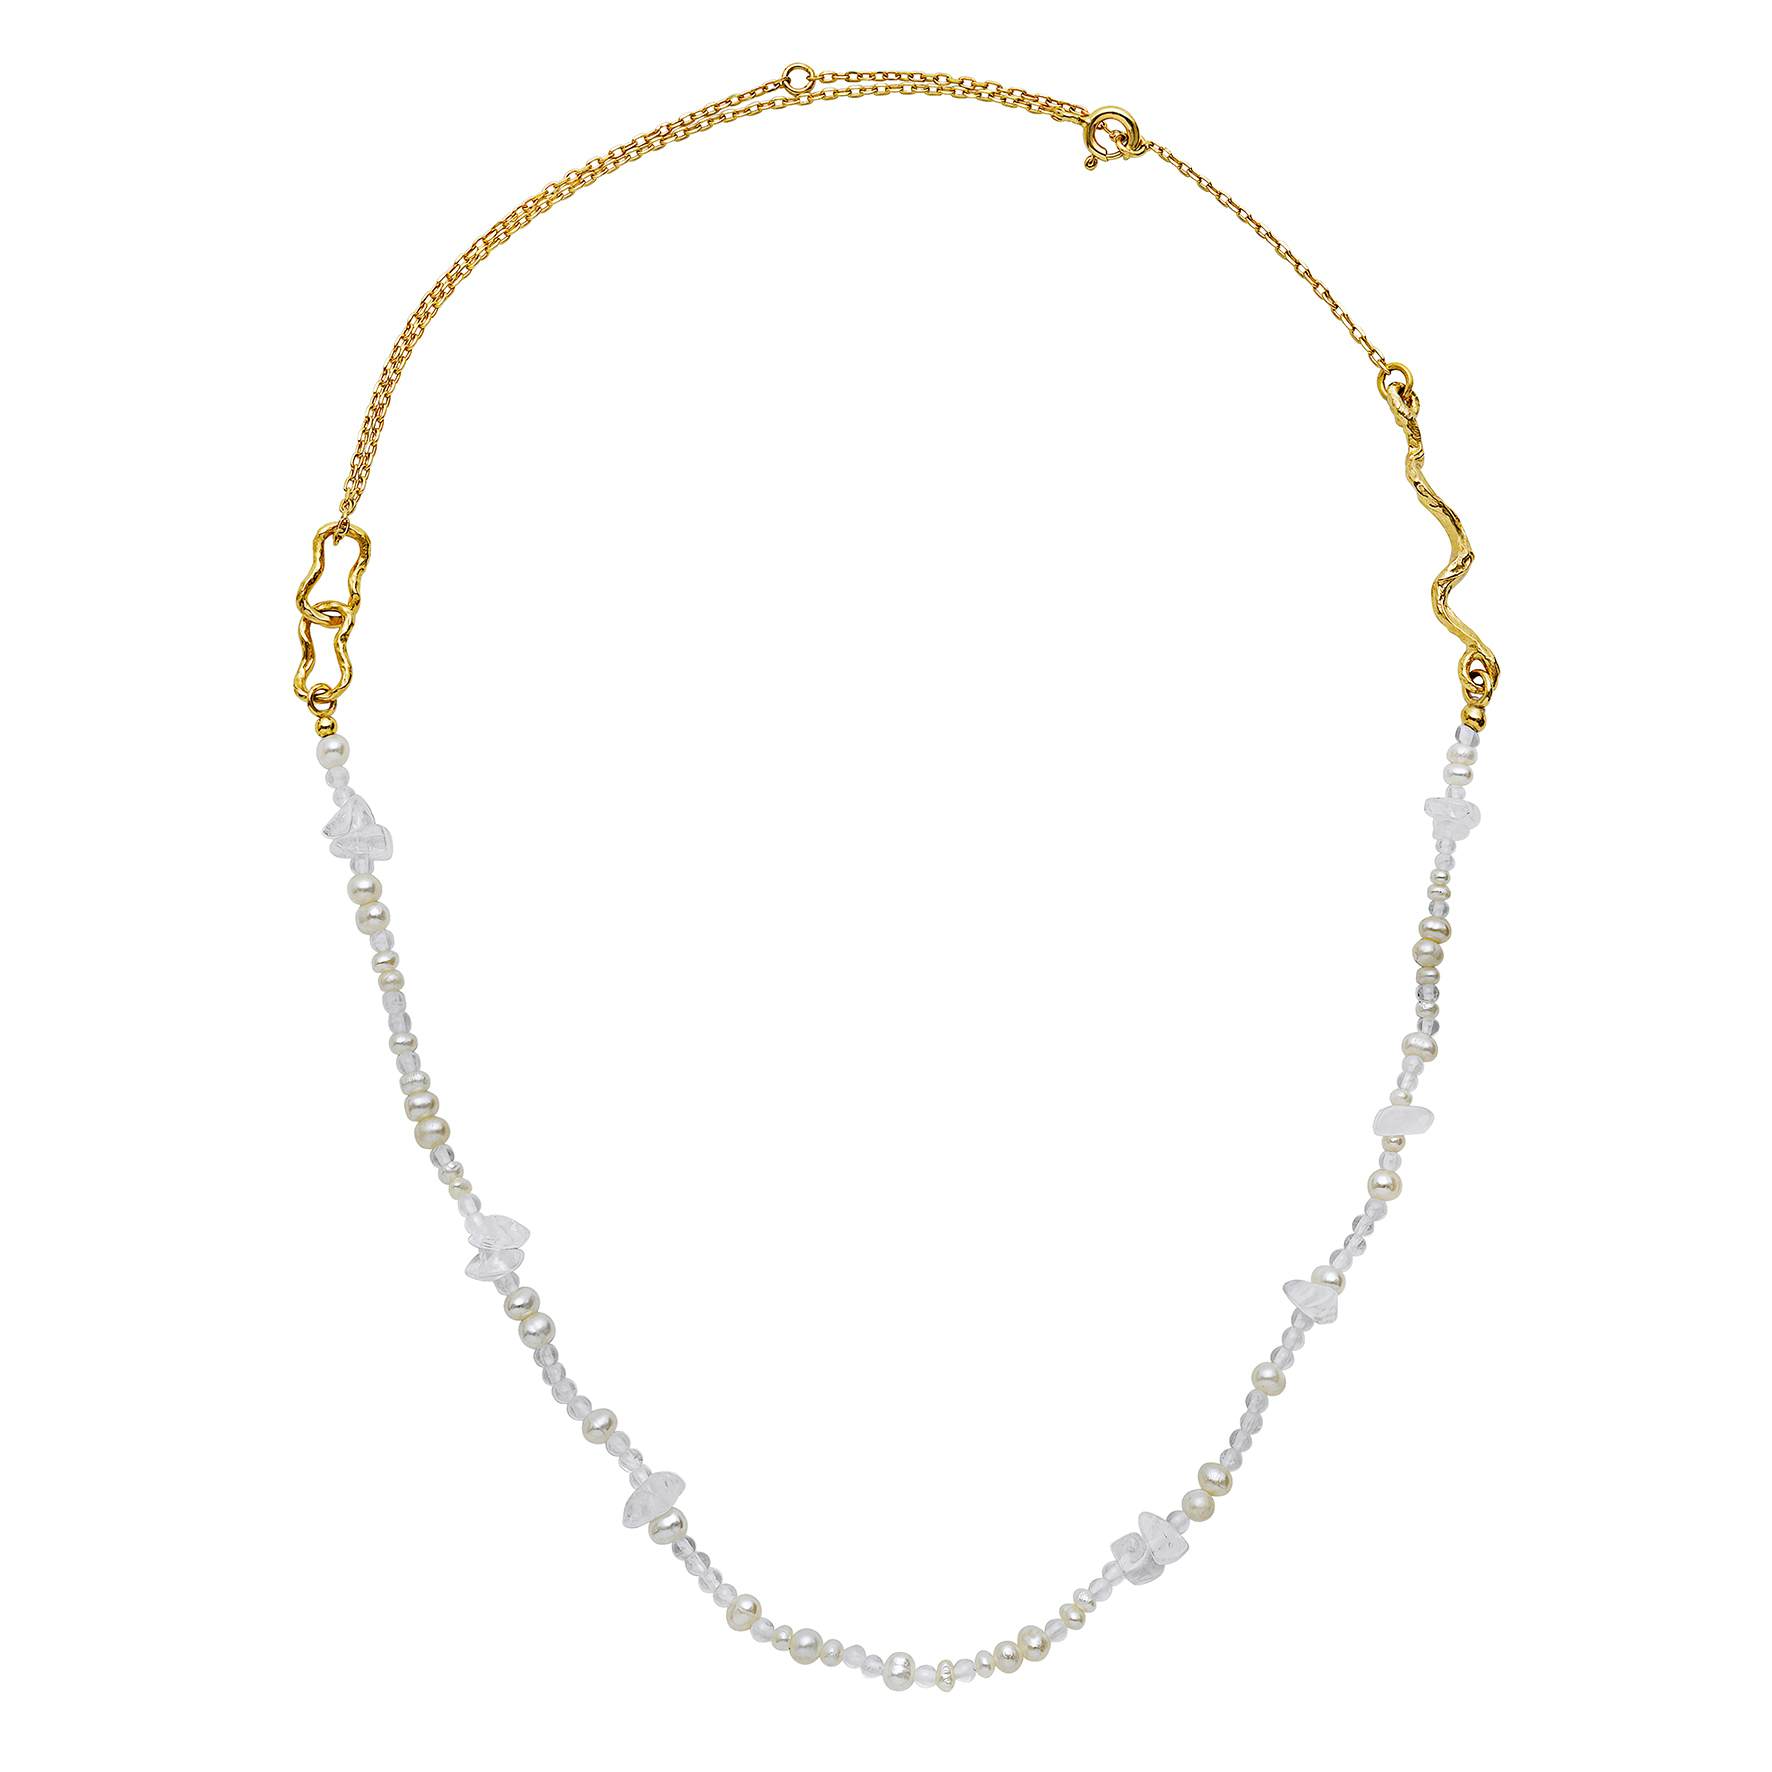 Coco Necklace from Maanesten in Goldplated-Silver Sterling 925